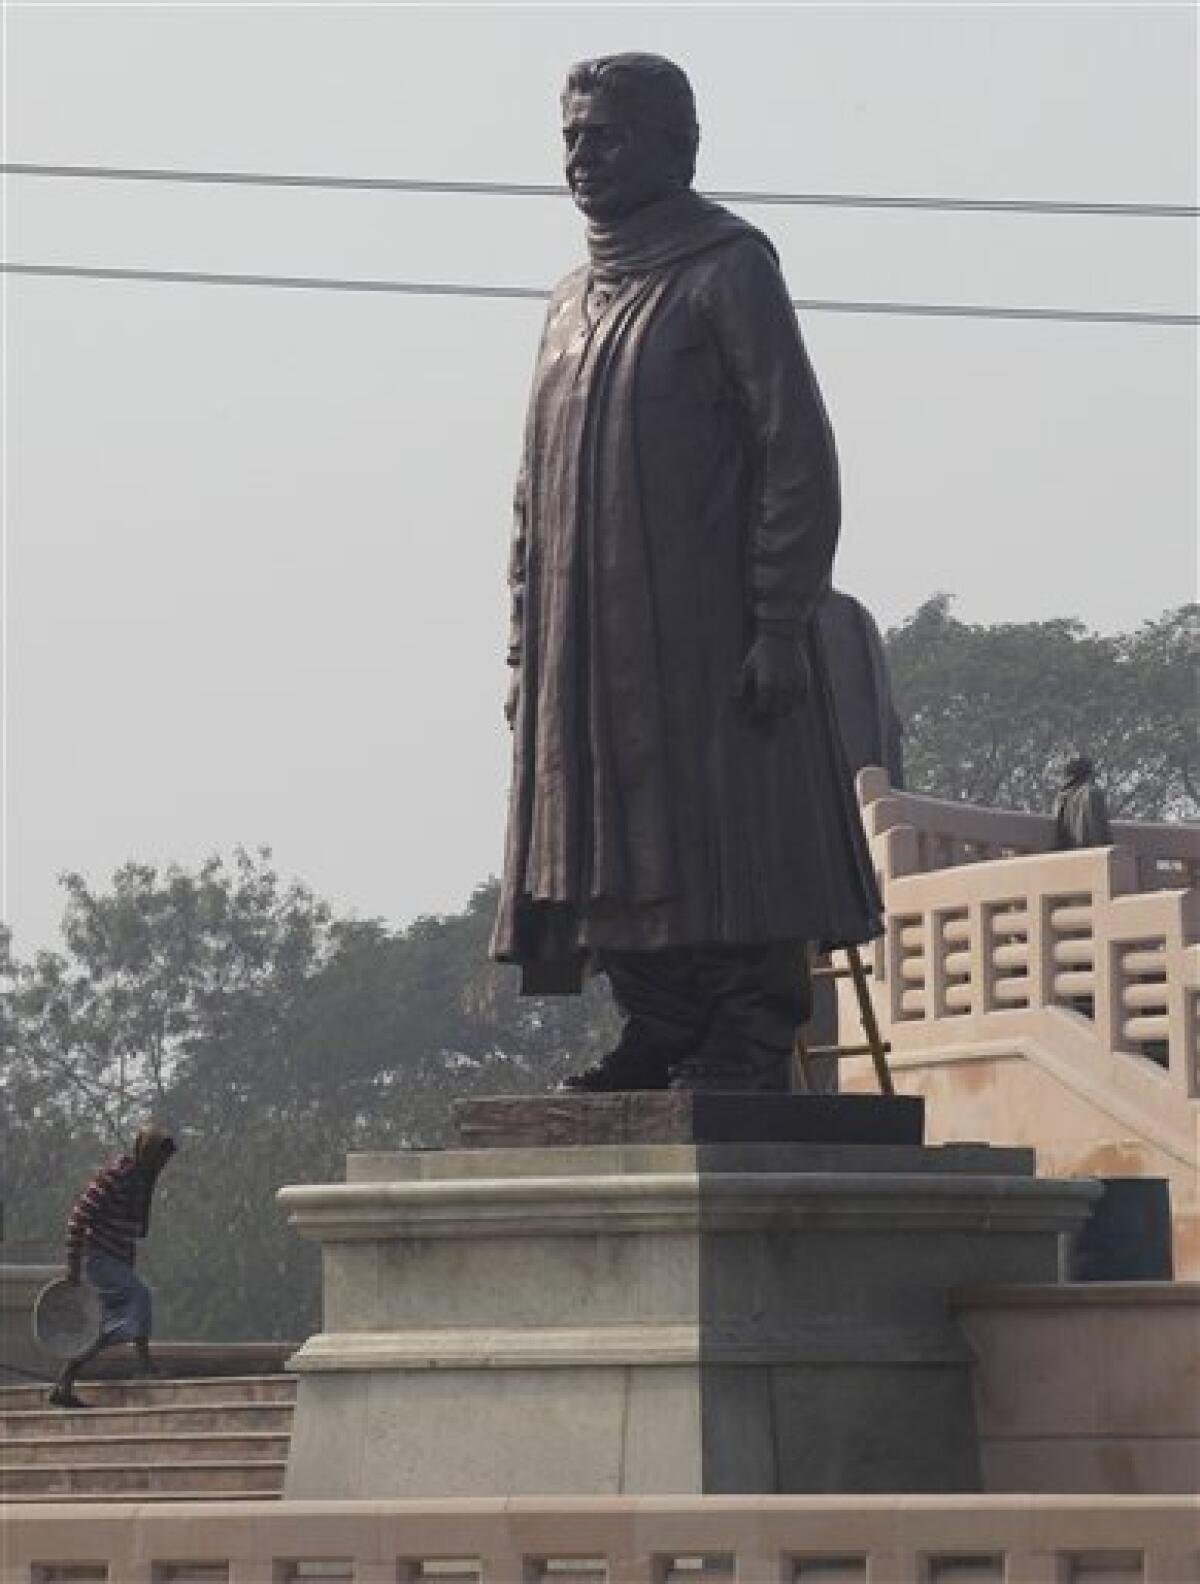 A worker walks by a statue of the Chief Minister of Uttar Pradesh, Mayawati, at a park in Noida, Uttar Pradesh, India, Monday, Jan. 9, 2012. Workmen carting truckloads of cloth raced Monday to comply with election regulations and cover up a dozen gigantic statues that a flamboyant Indian chief minister had erected of herself. India's Election Commission said the massive statues of Mayawati, who uses one name and is a hero to the country's lowest castes, were built using public money and their display violated the rules for next month's election in her Uttar Pradesh state. (AP Photo/Saurabh Das)